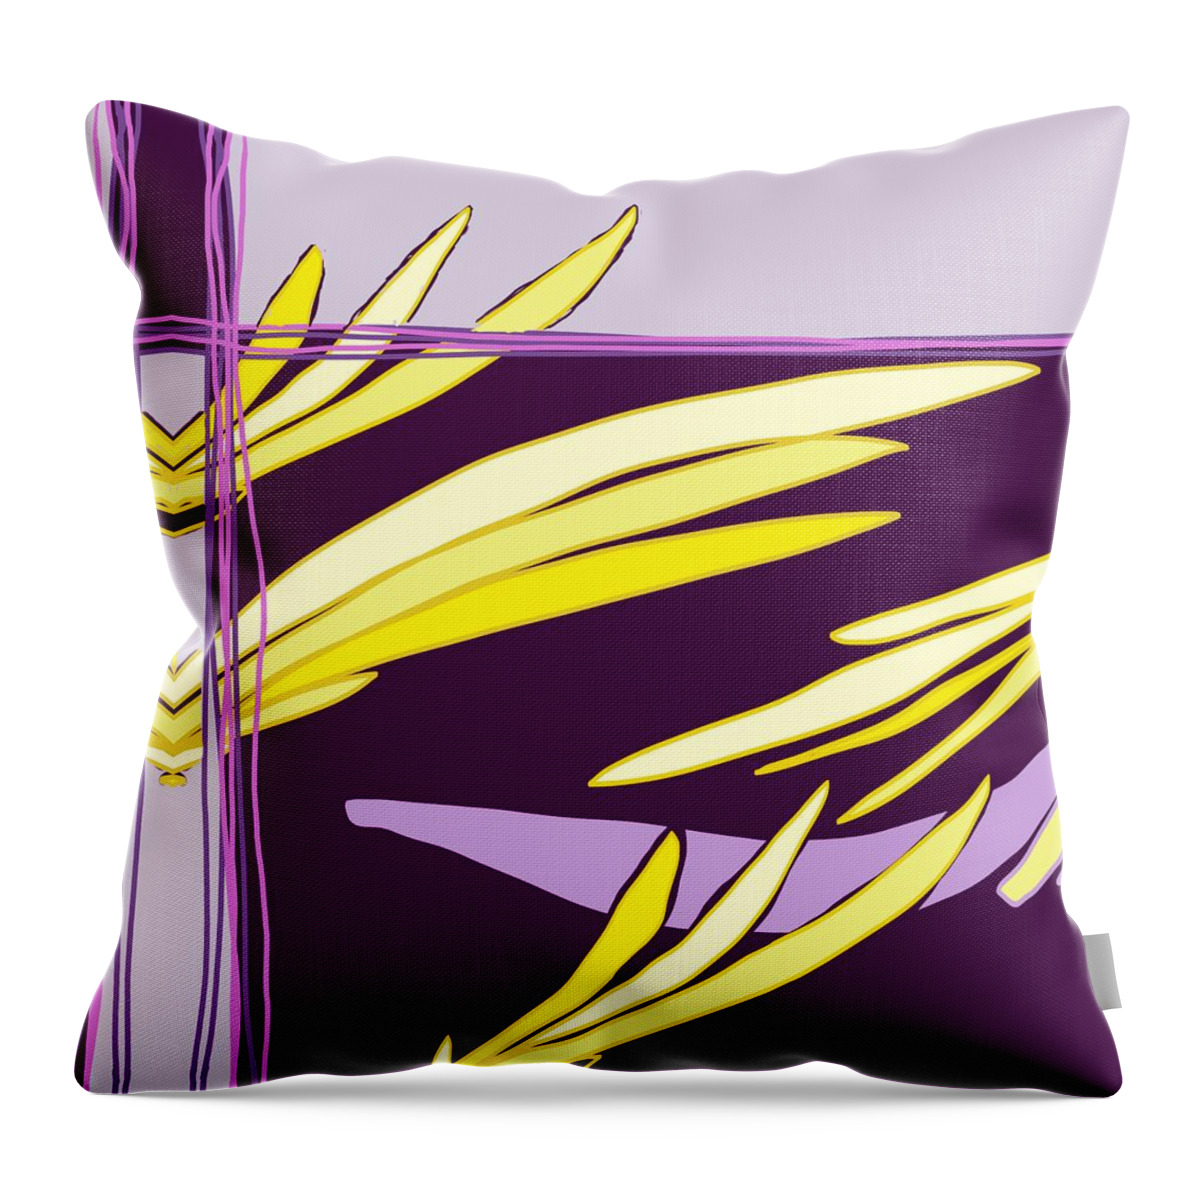 Feathers Throw Pillow featuring the digital art Featherbed Fracture by Laureen Murtha Menzl